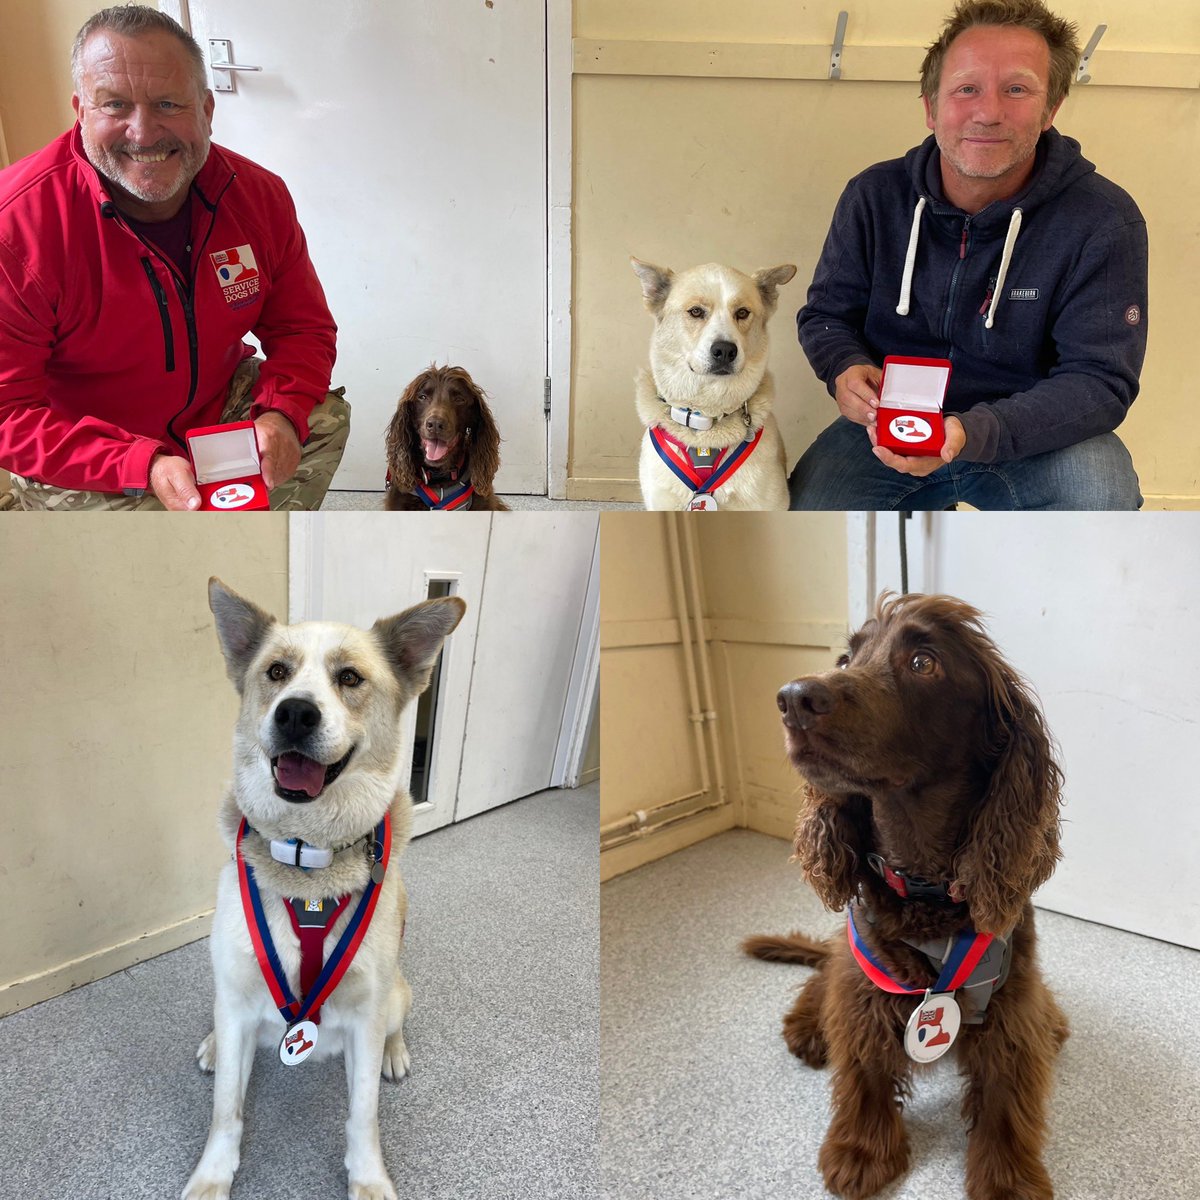 Our very first assistance dogs, Ajax and Jerry, with their long service medals🏅accredited in Sept 2016 and are still going strong today! Veterans, Lee and Mark, also received an engraved commemorative coin. We are so proud of what our partners achieve together! ❤️😊🐕‍🦺👍🐾 #ptsd